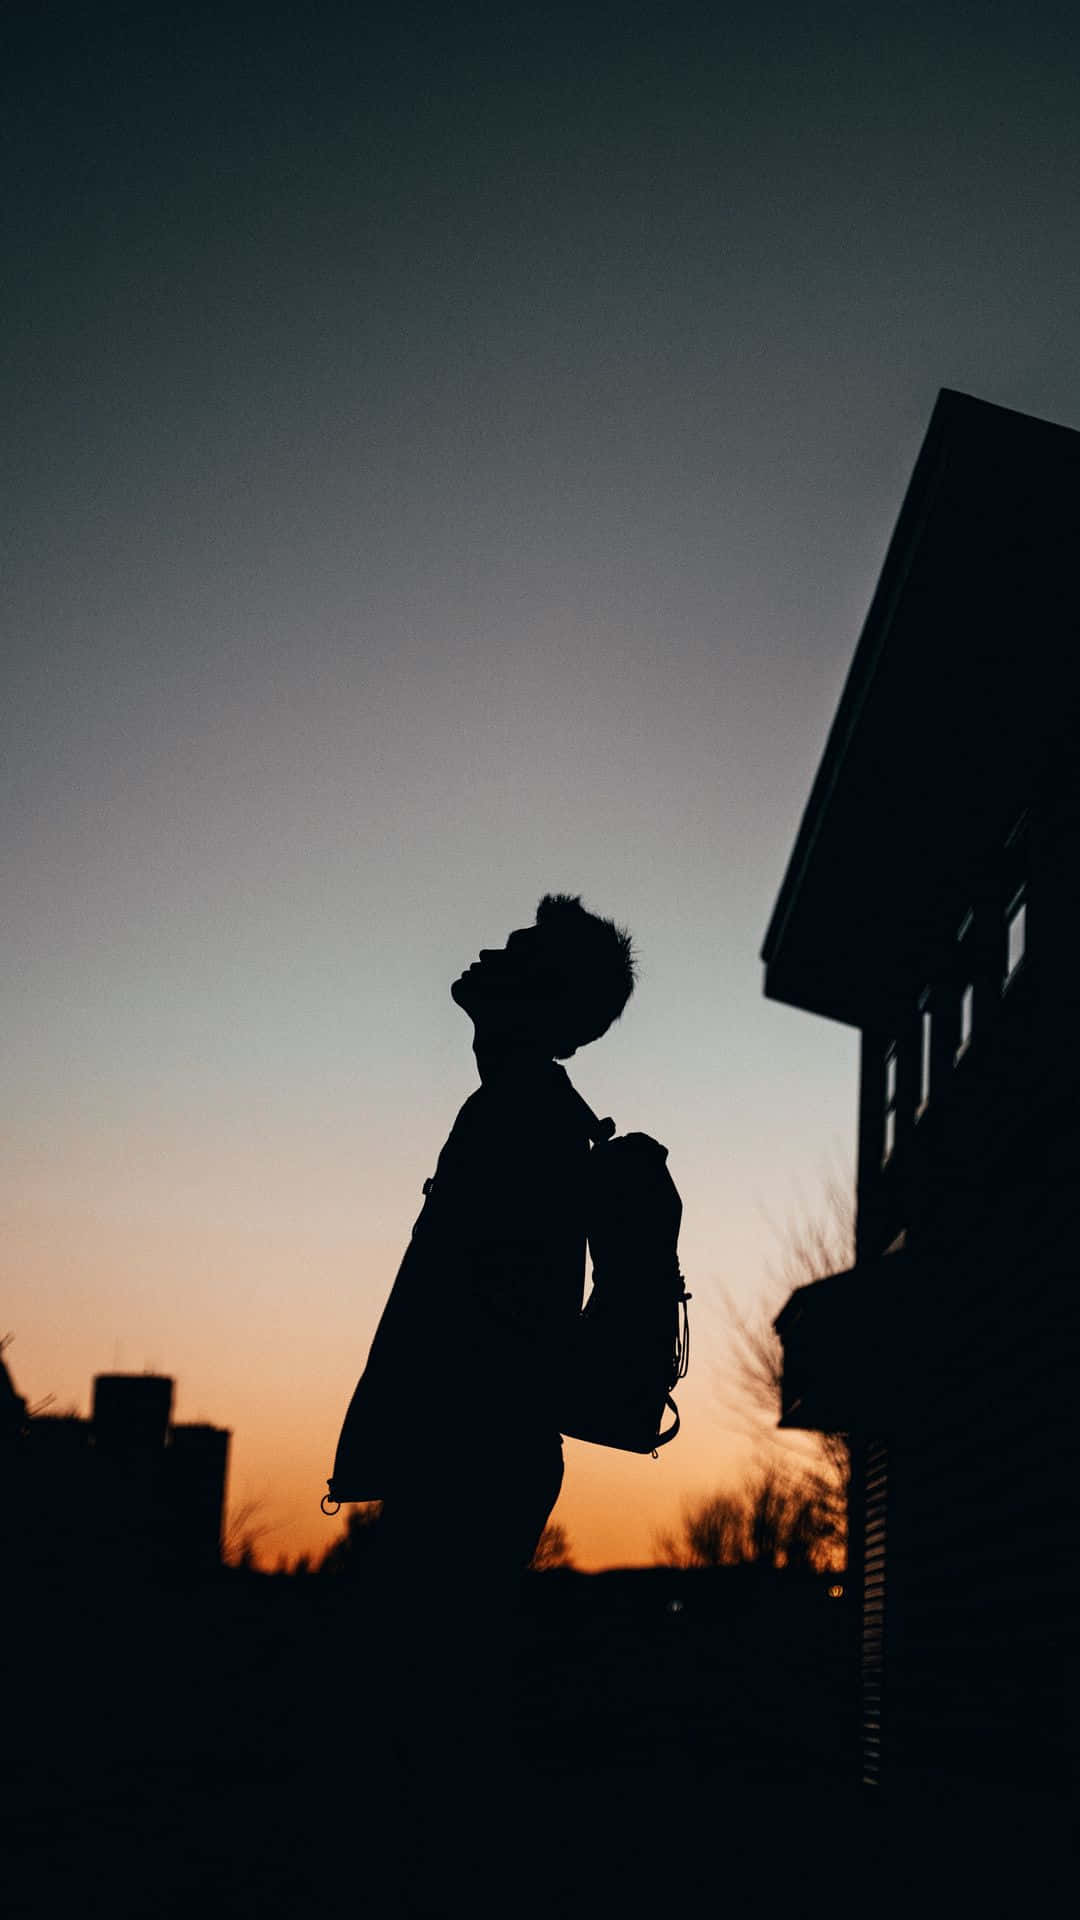 Silhouette Of A Man Standing In Front Of A House At Sunset